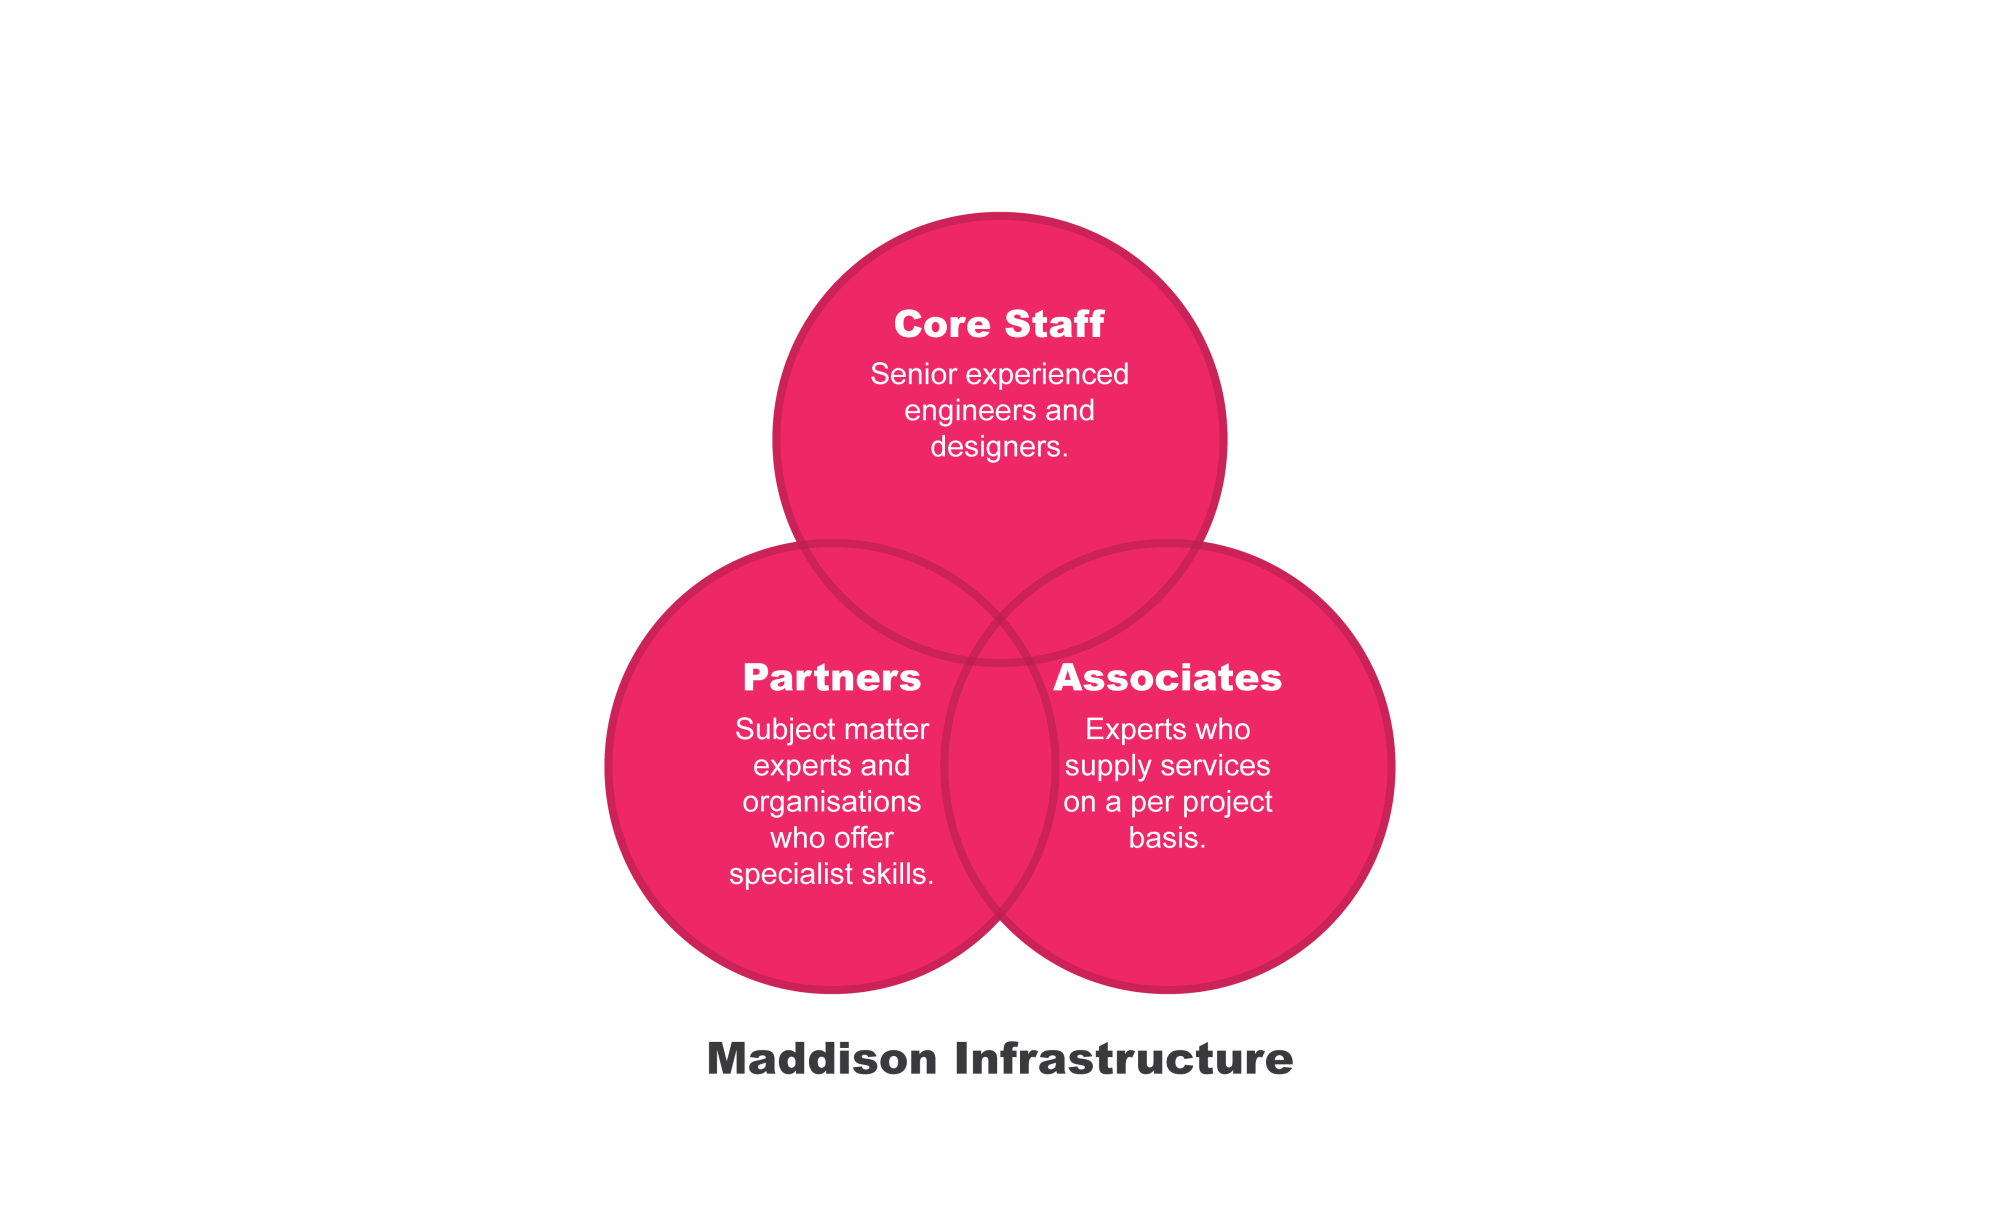 Maddison company structure and set-up, core staff, partners and associates. 